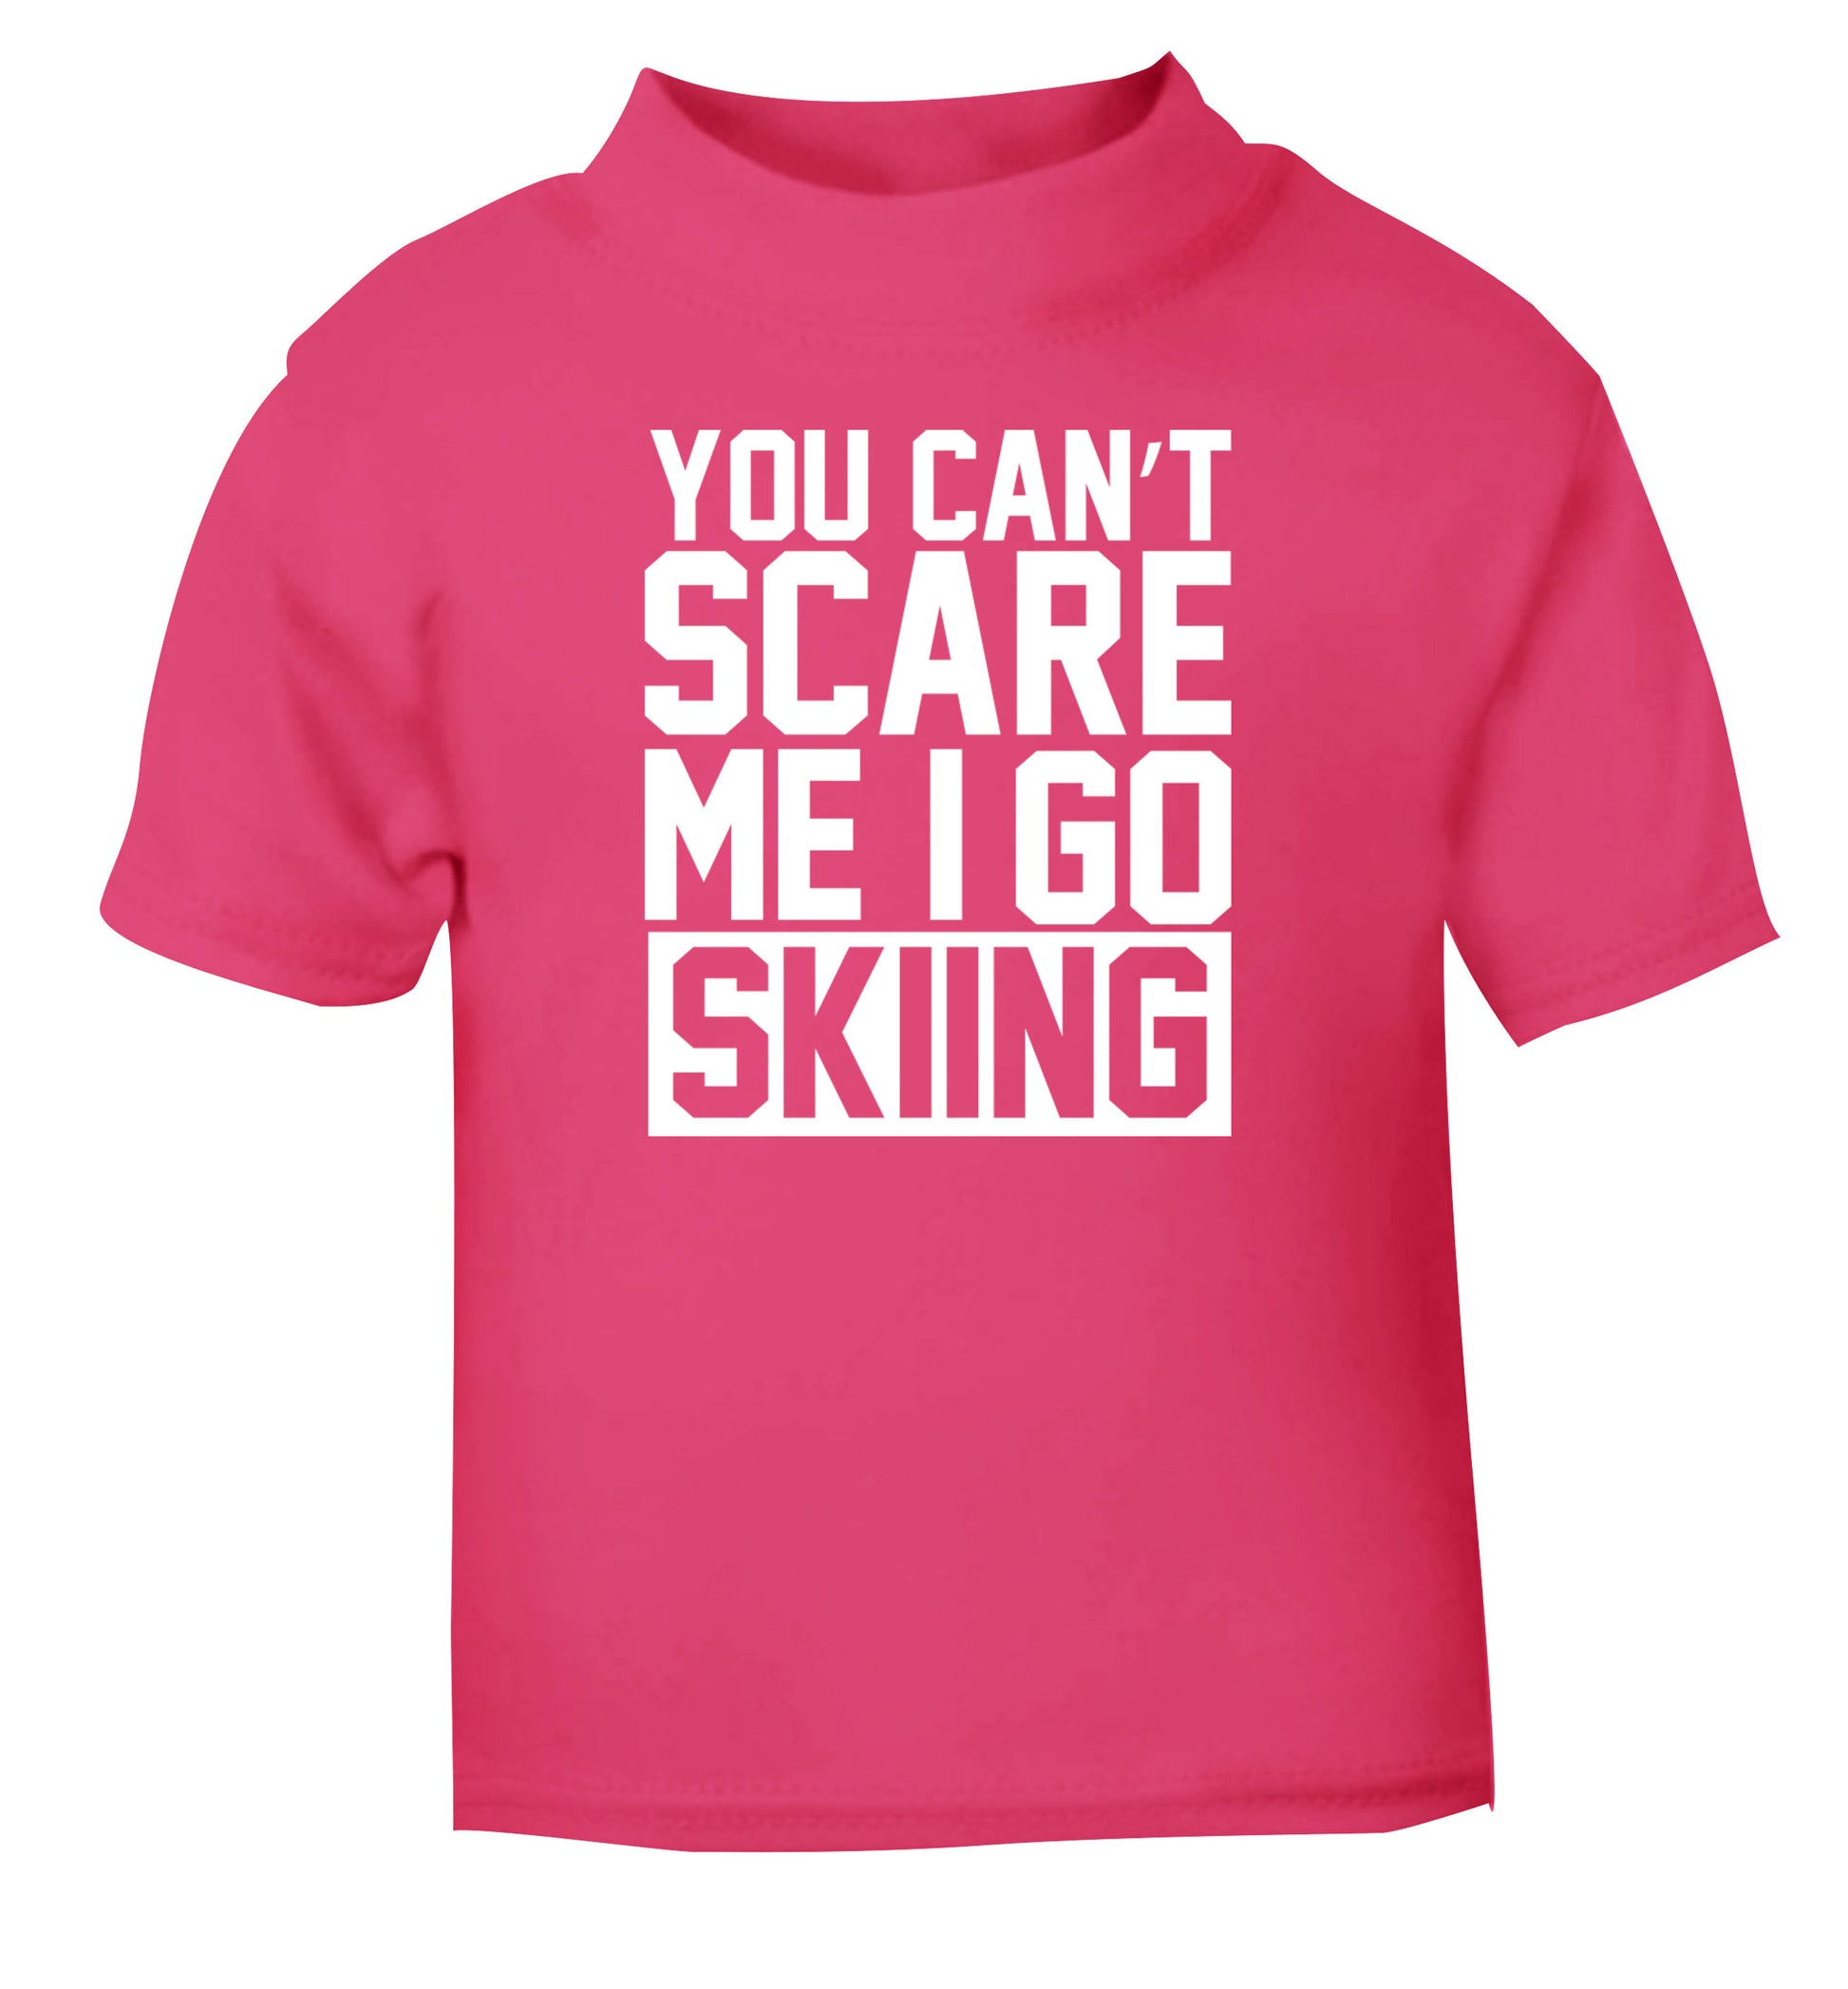 You can't scare me I go skiing pink Baby Toddler Tshirt 2 Years